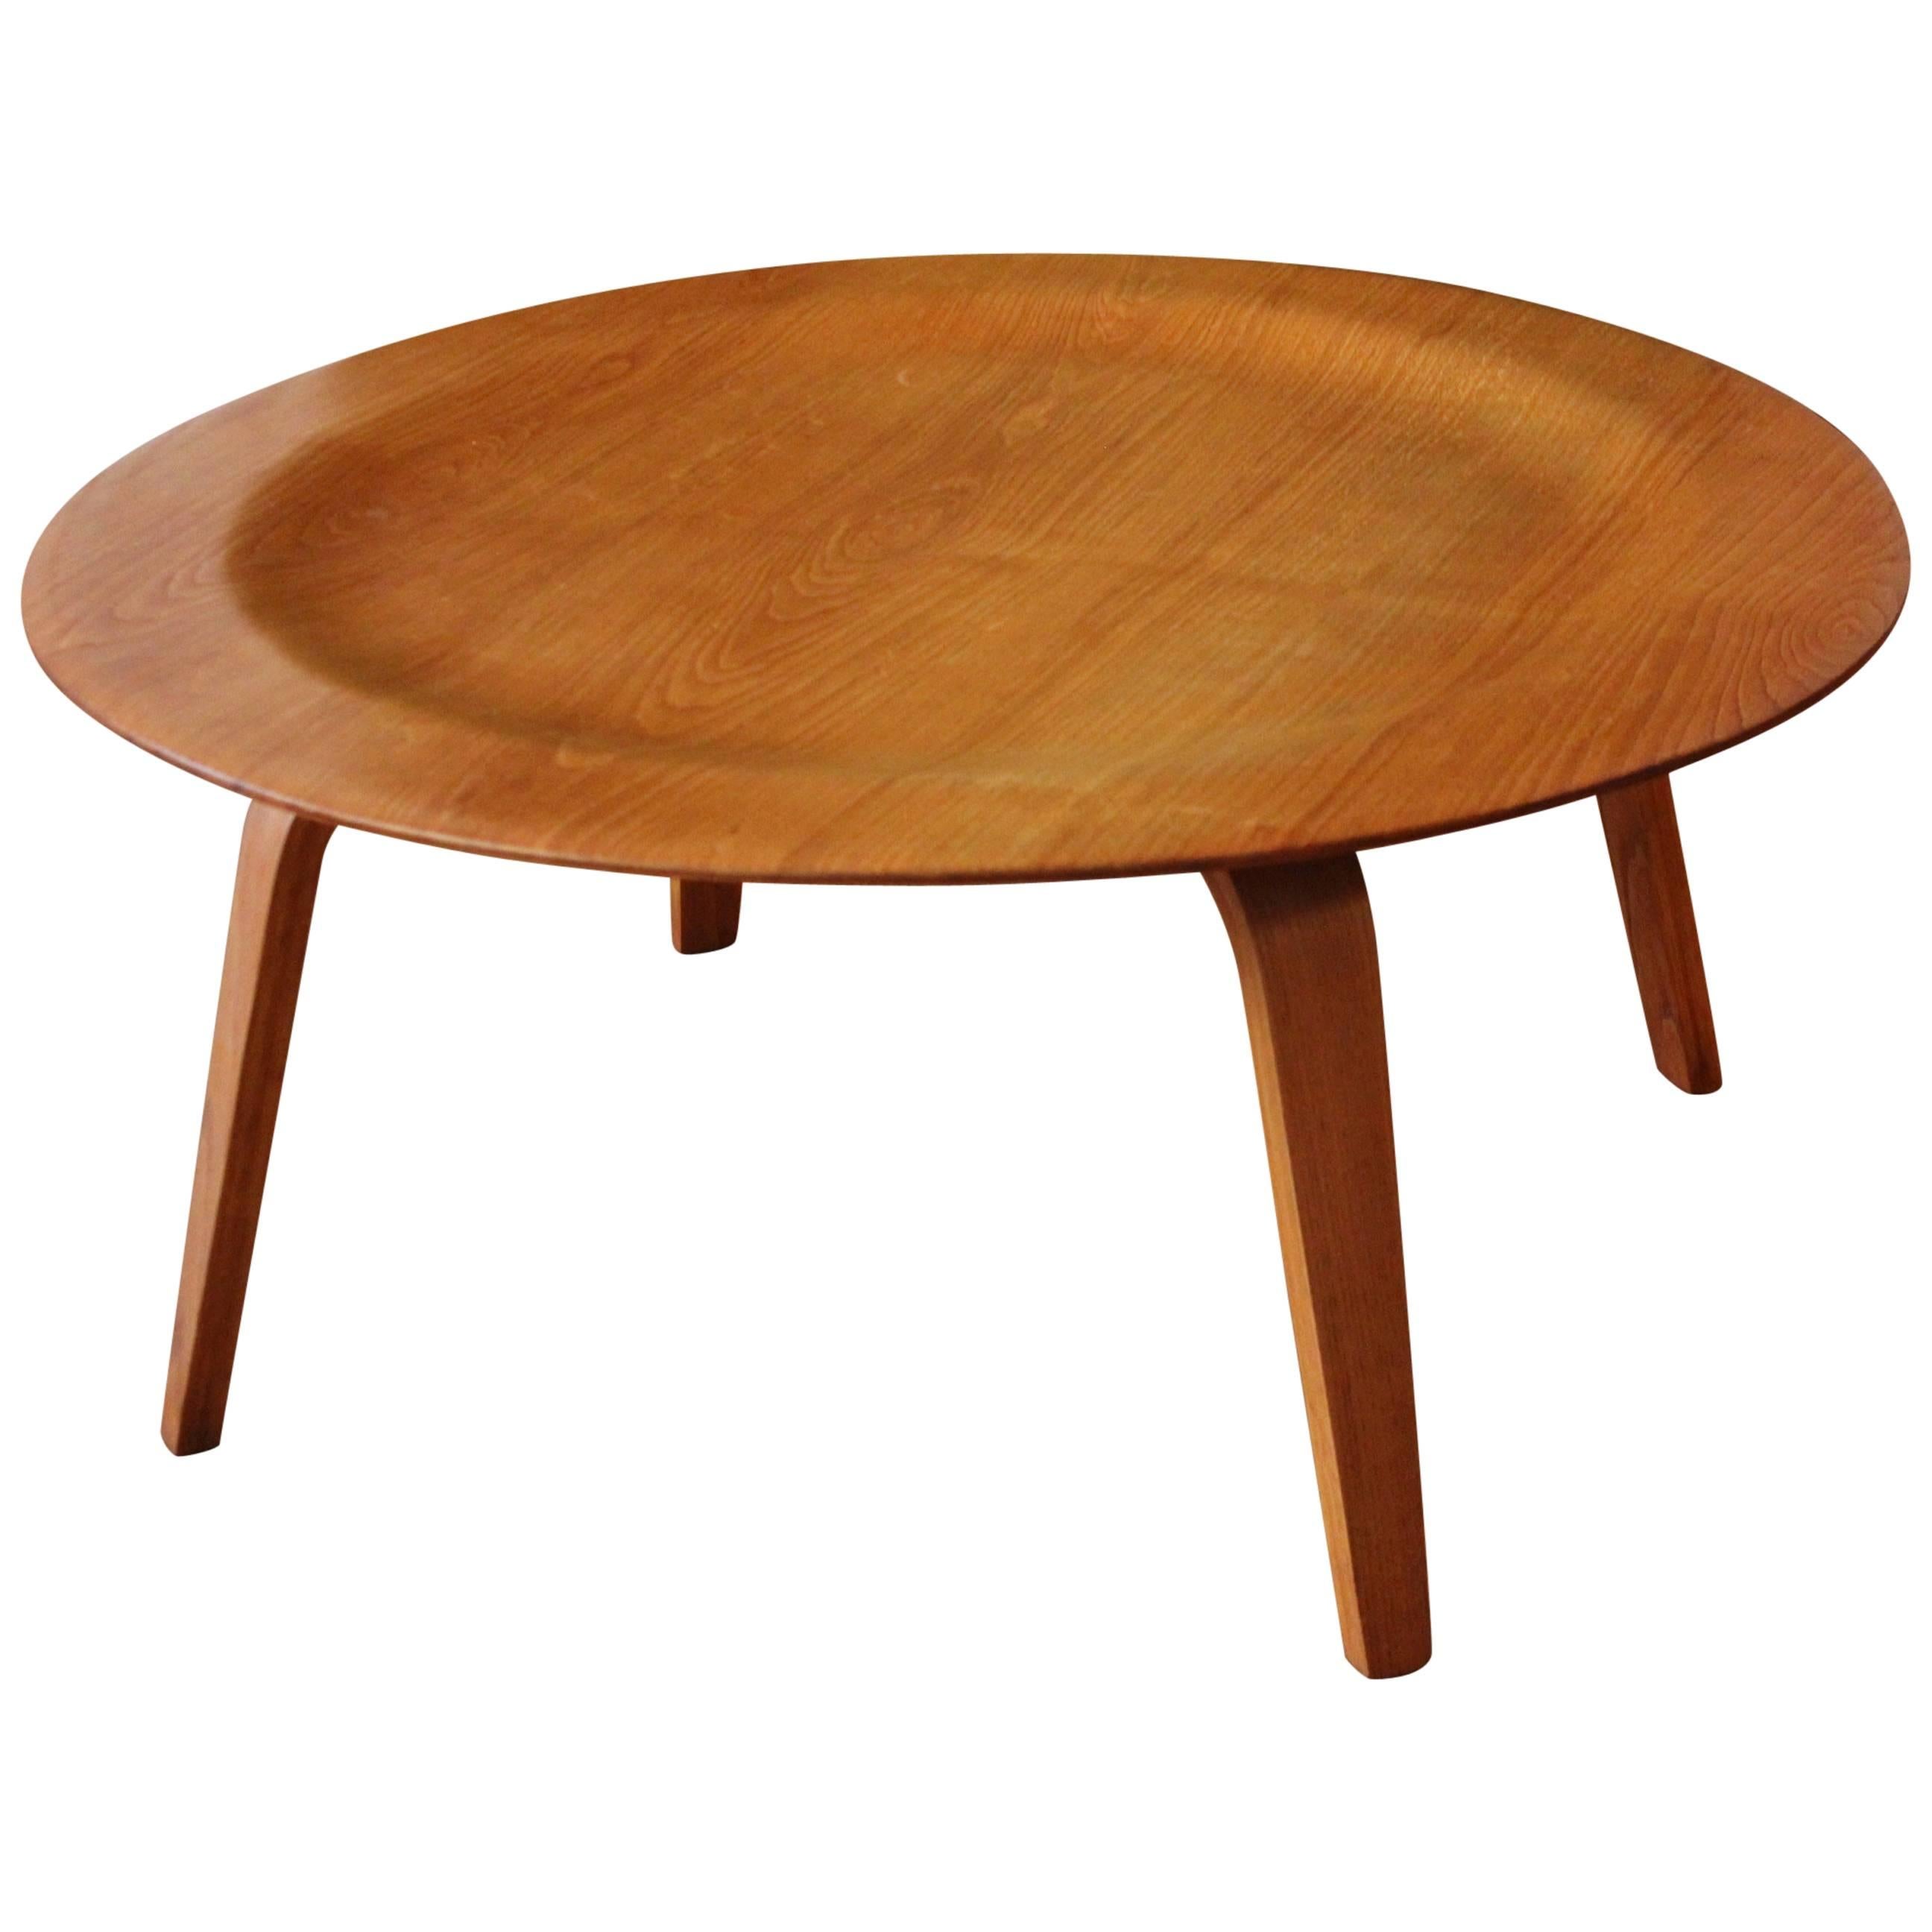 Eames Charles and Ray Eames CTW ( Coffee Table Wood ) for Herman Miller